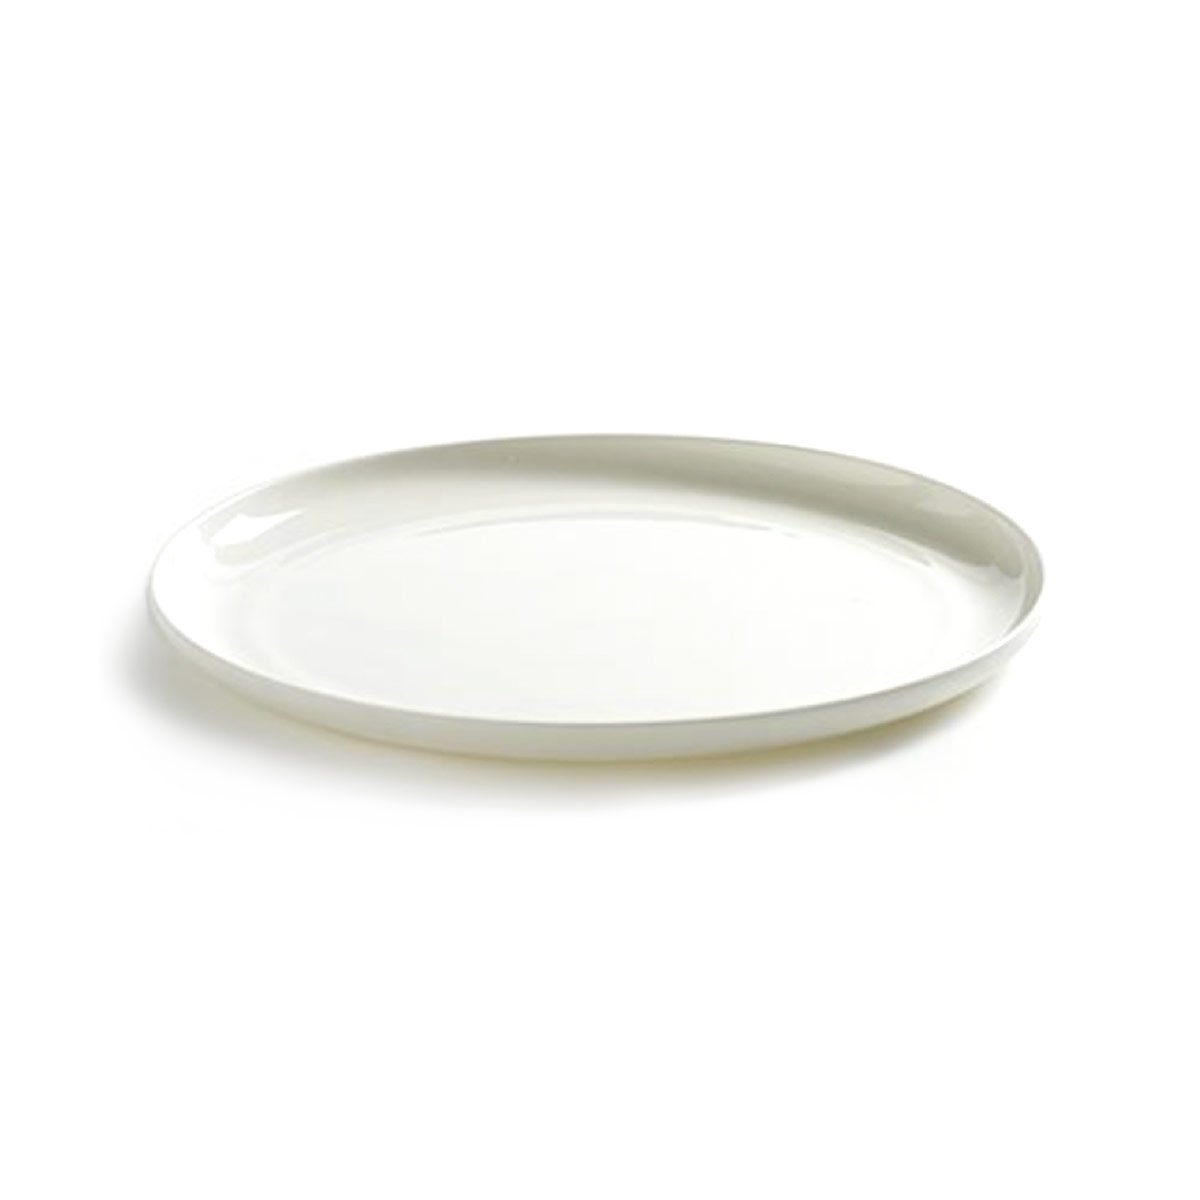 Piet Boon Low Plate, Large